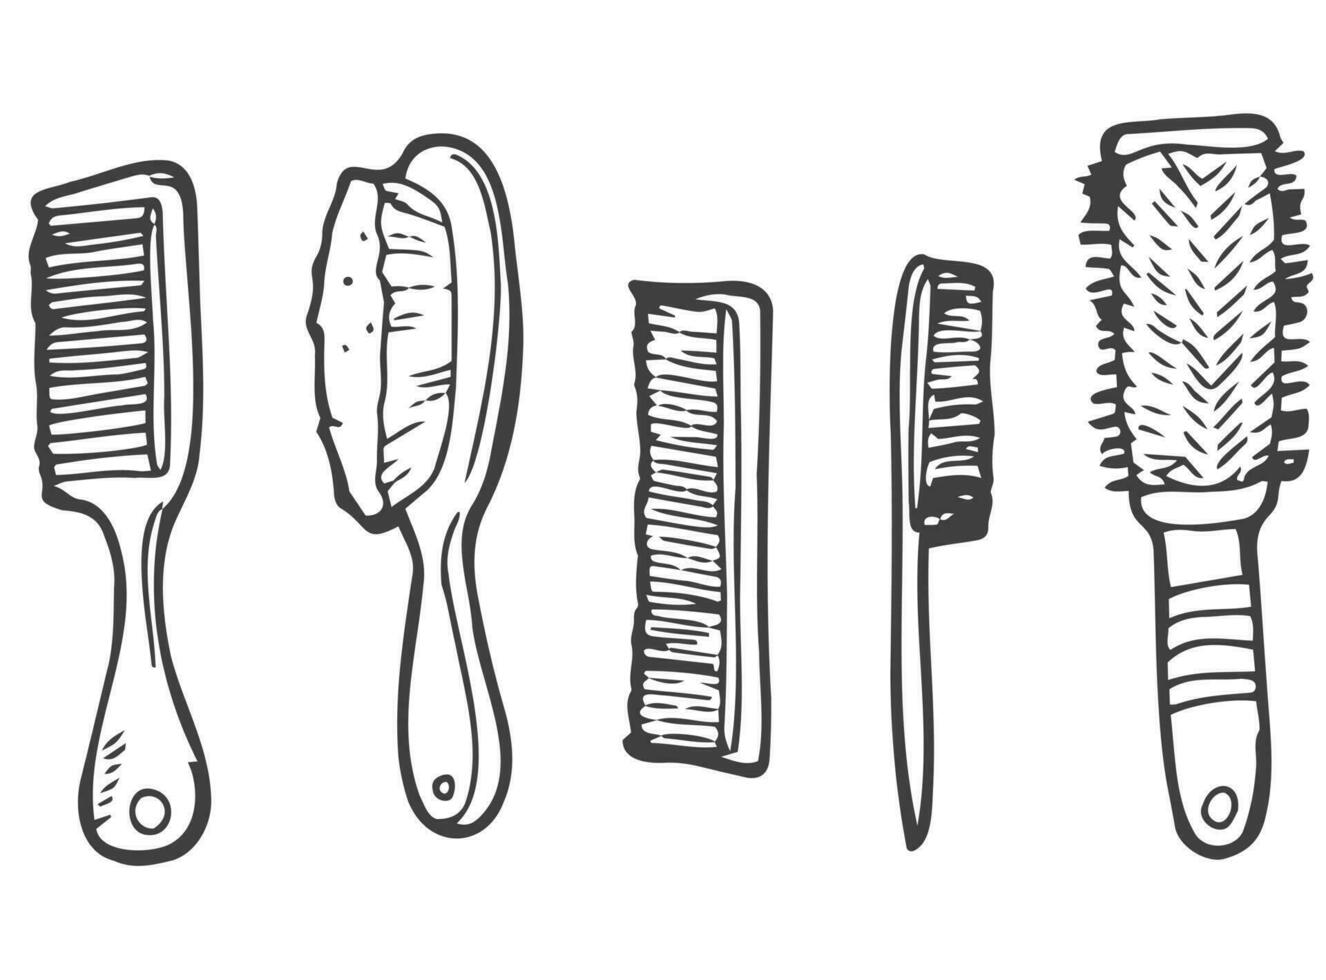 Doodle Hair Brush hairdressing brushector Set. Hair care and hairdressing concept. vector